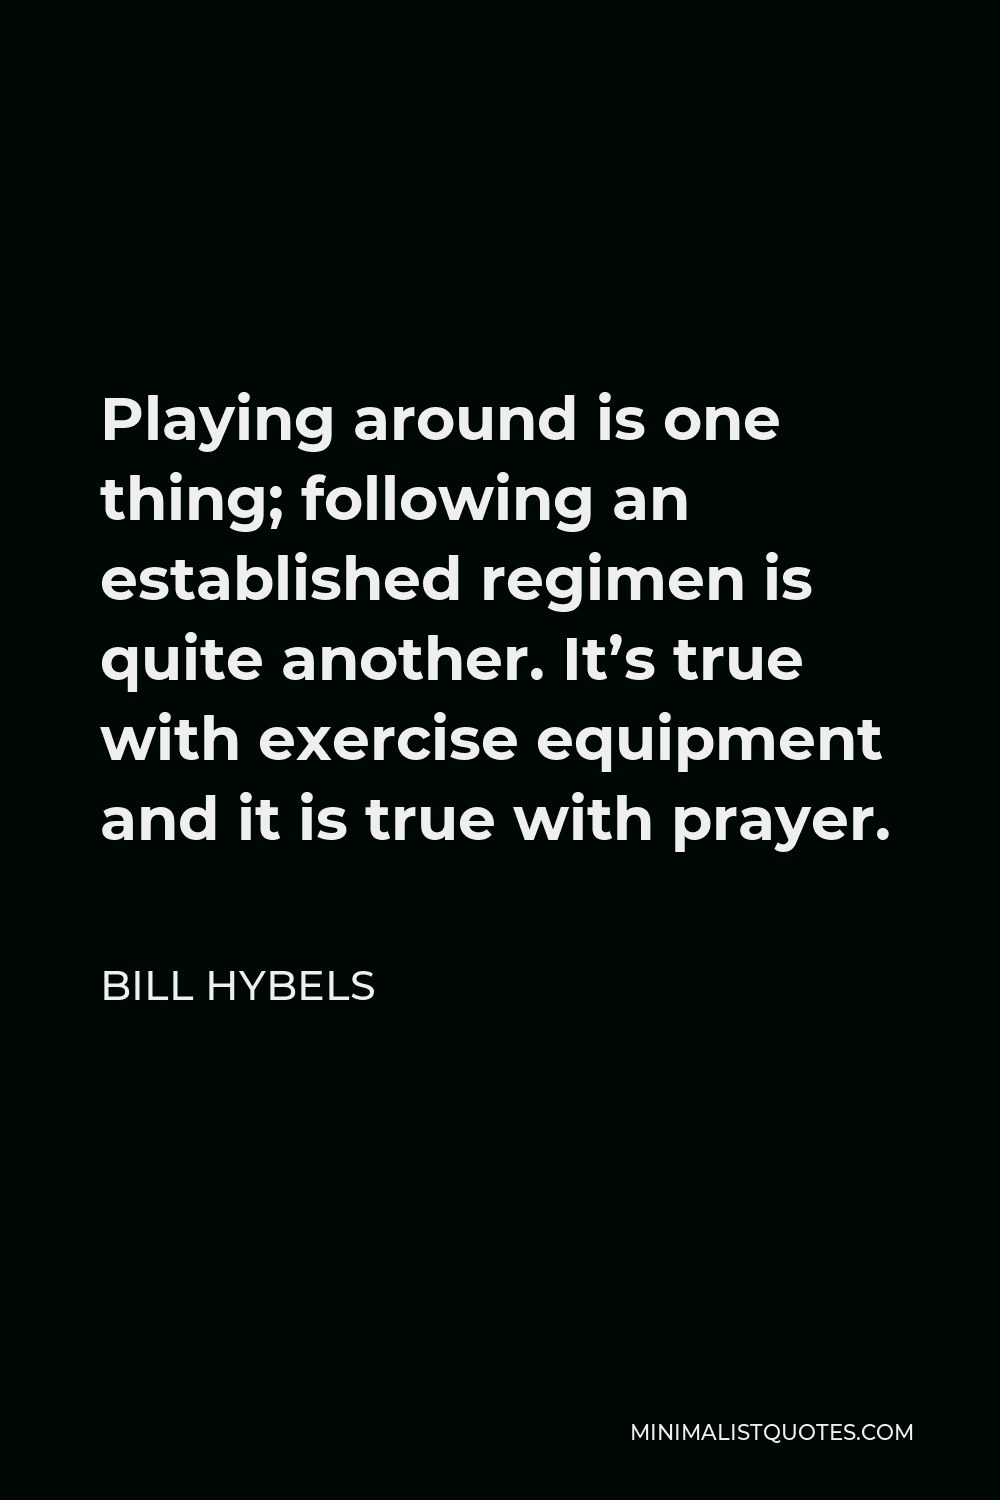 Bill Hybels Quote - Playing around is one thing; following an established regimen is quite another. It’s true with exercise equipment and it is true with prayer.